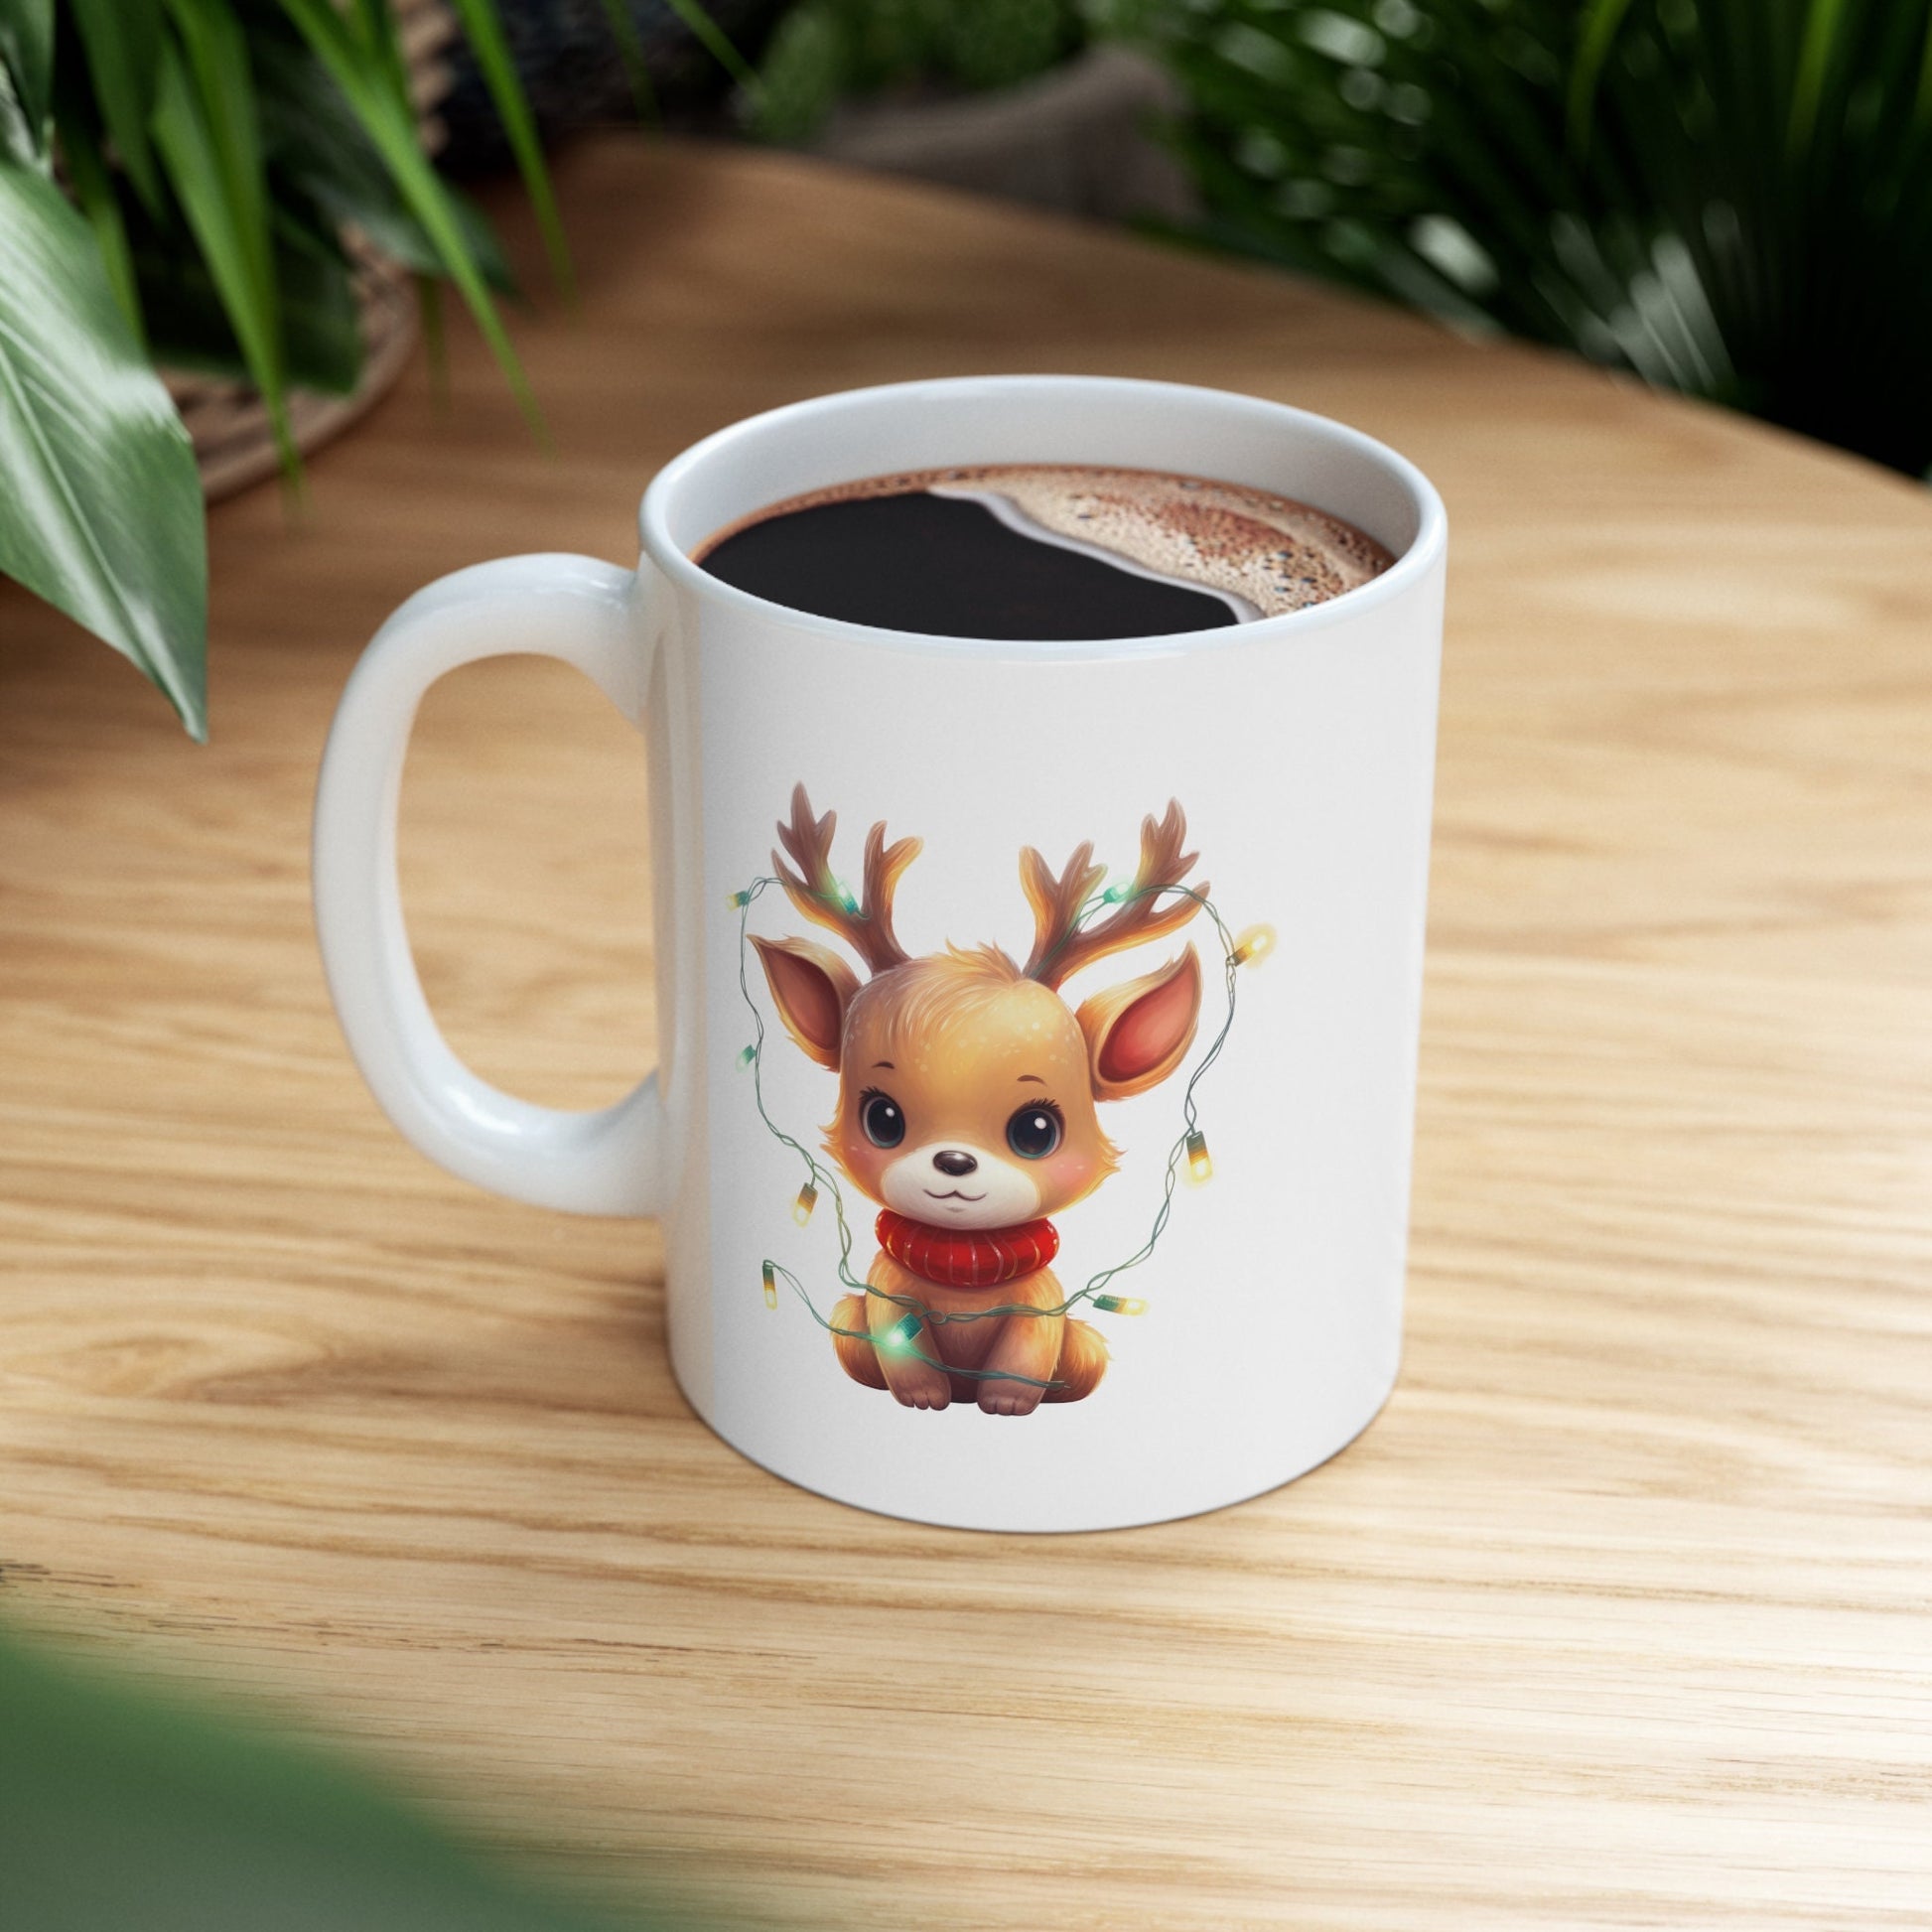 The Reindeer with Lights Christmas Mug Makes the Perfect Gift for Friends, Family, Coworkers or yourself.  Check Out My Shop for even more Great Designs.
www.scorpiontees.etsy.com